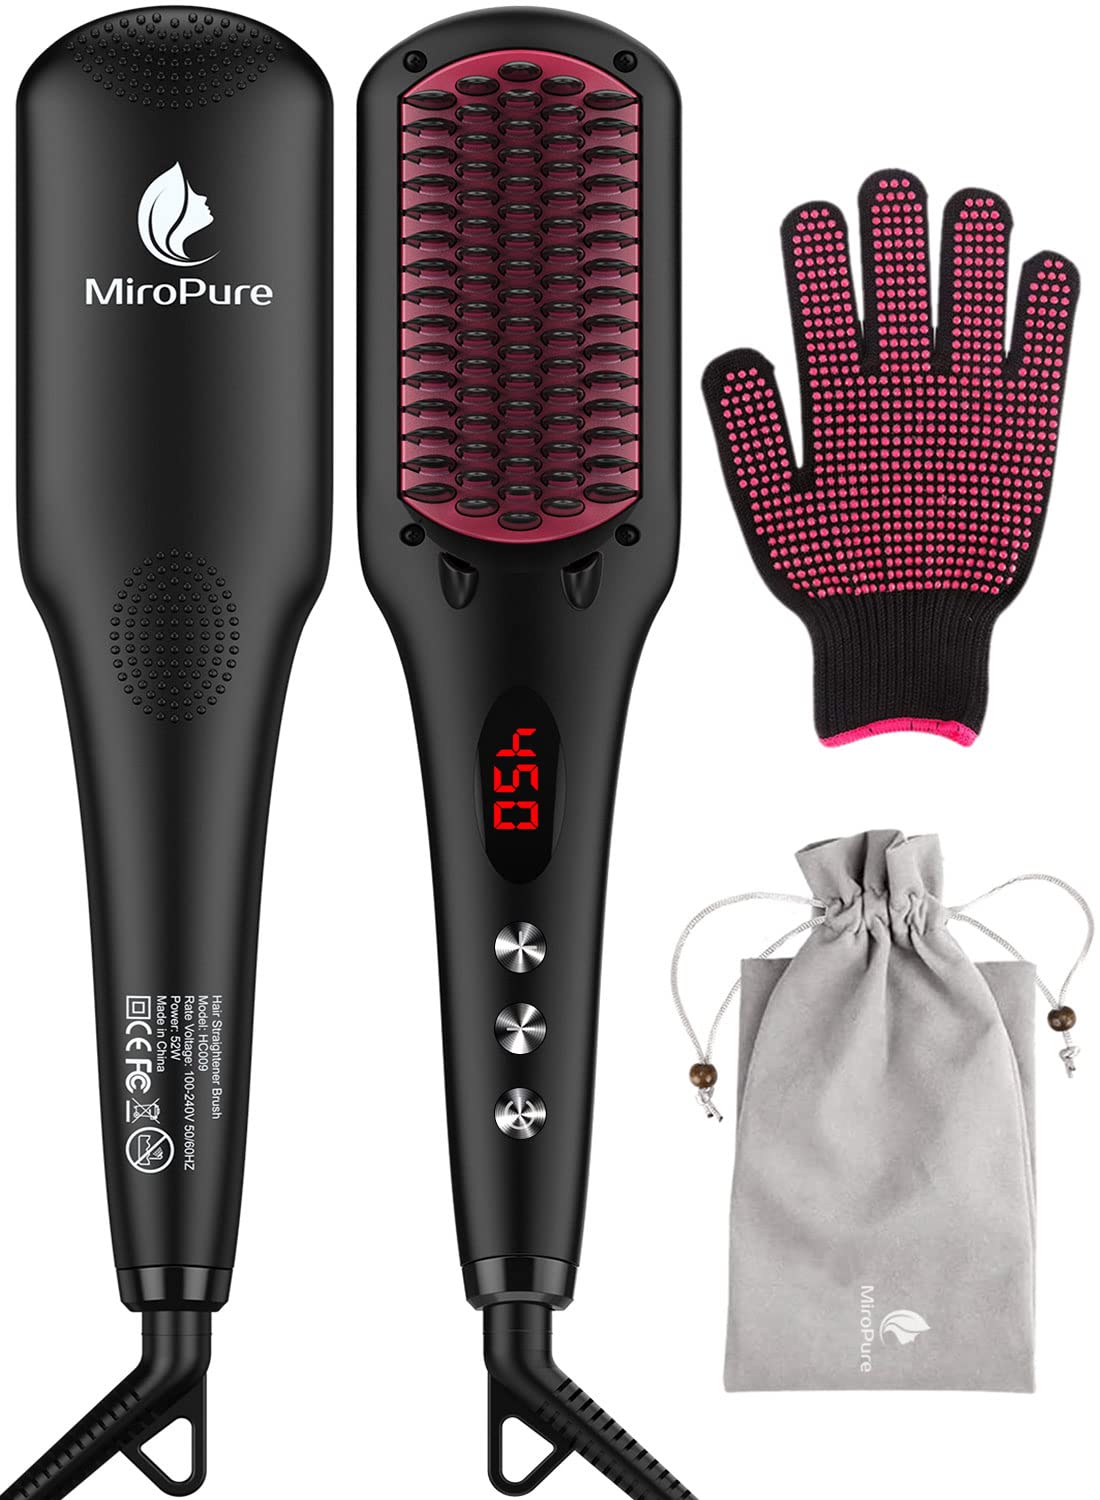 MiroPure 2 in 1 Ionic Hair Straightener Brush with Heat Resistant Glove and Temperature Lock Function